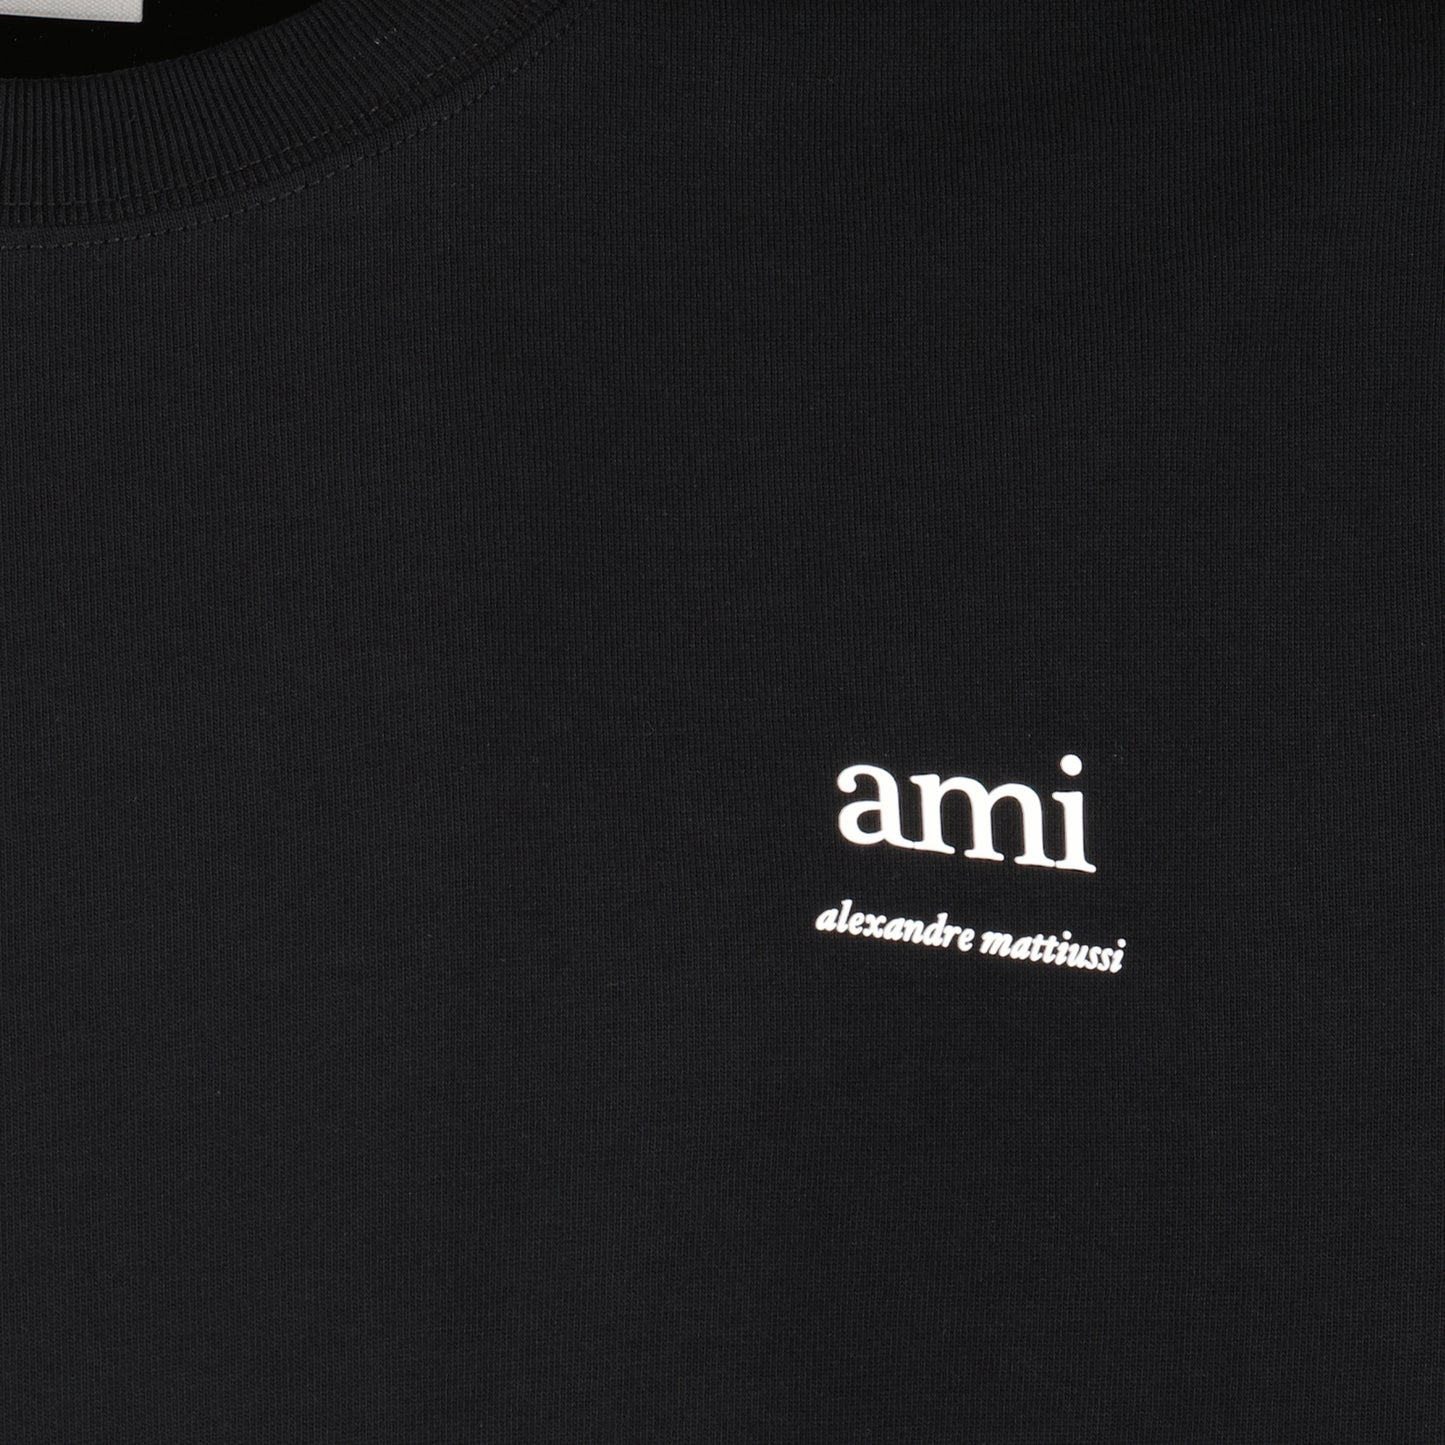 Embroidered Ami T-shirt